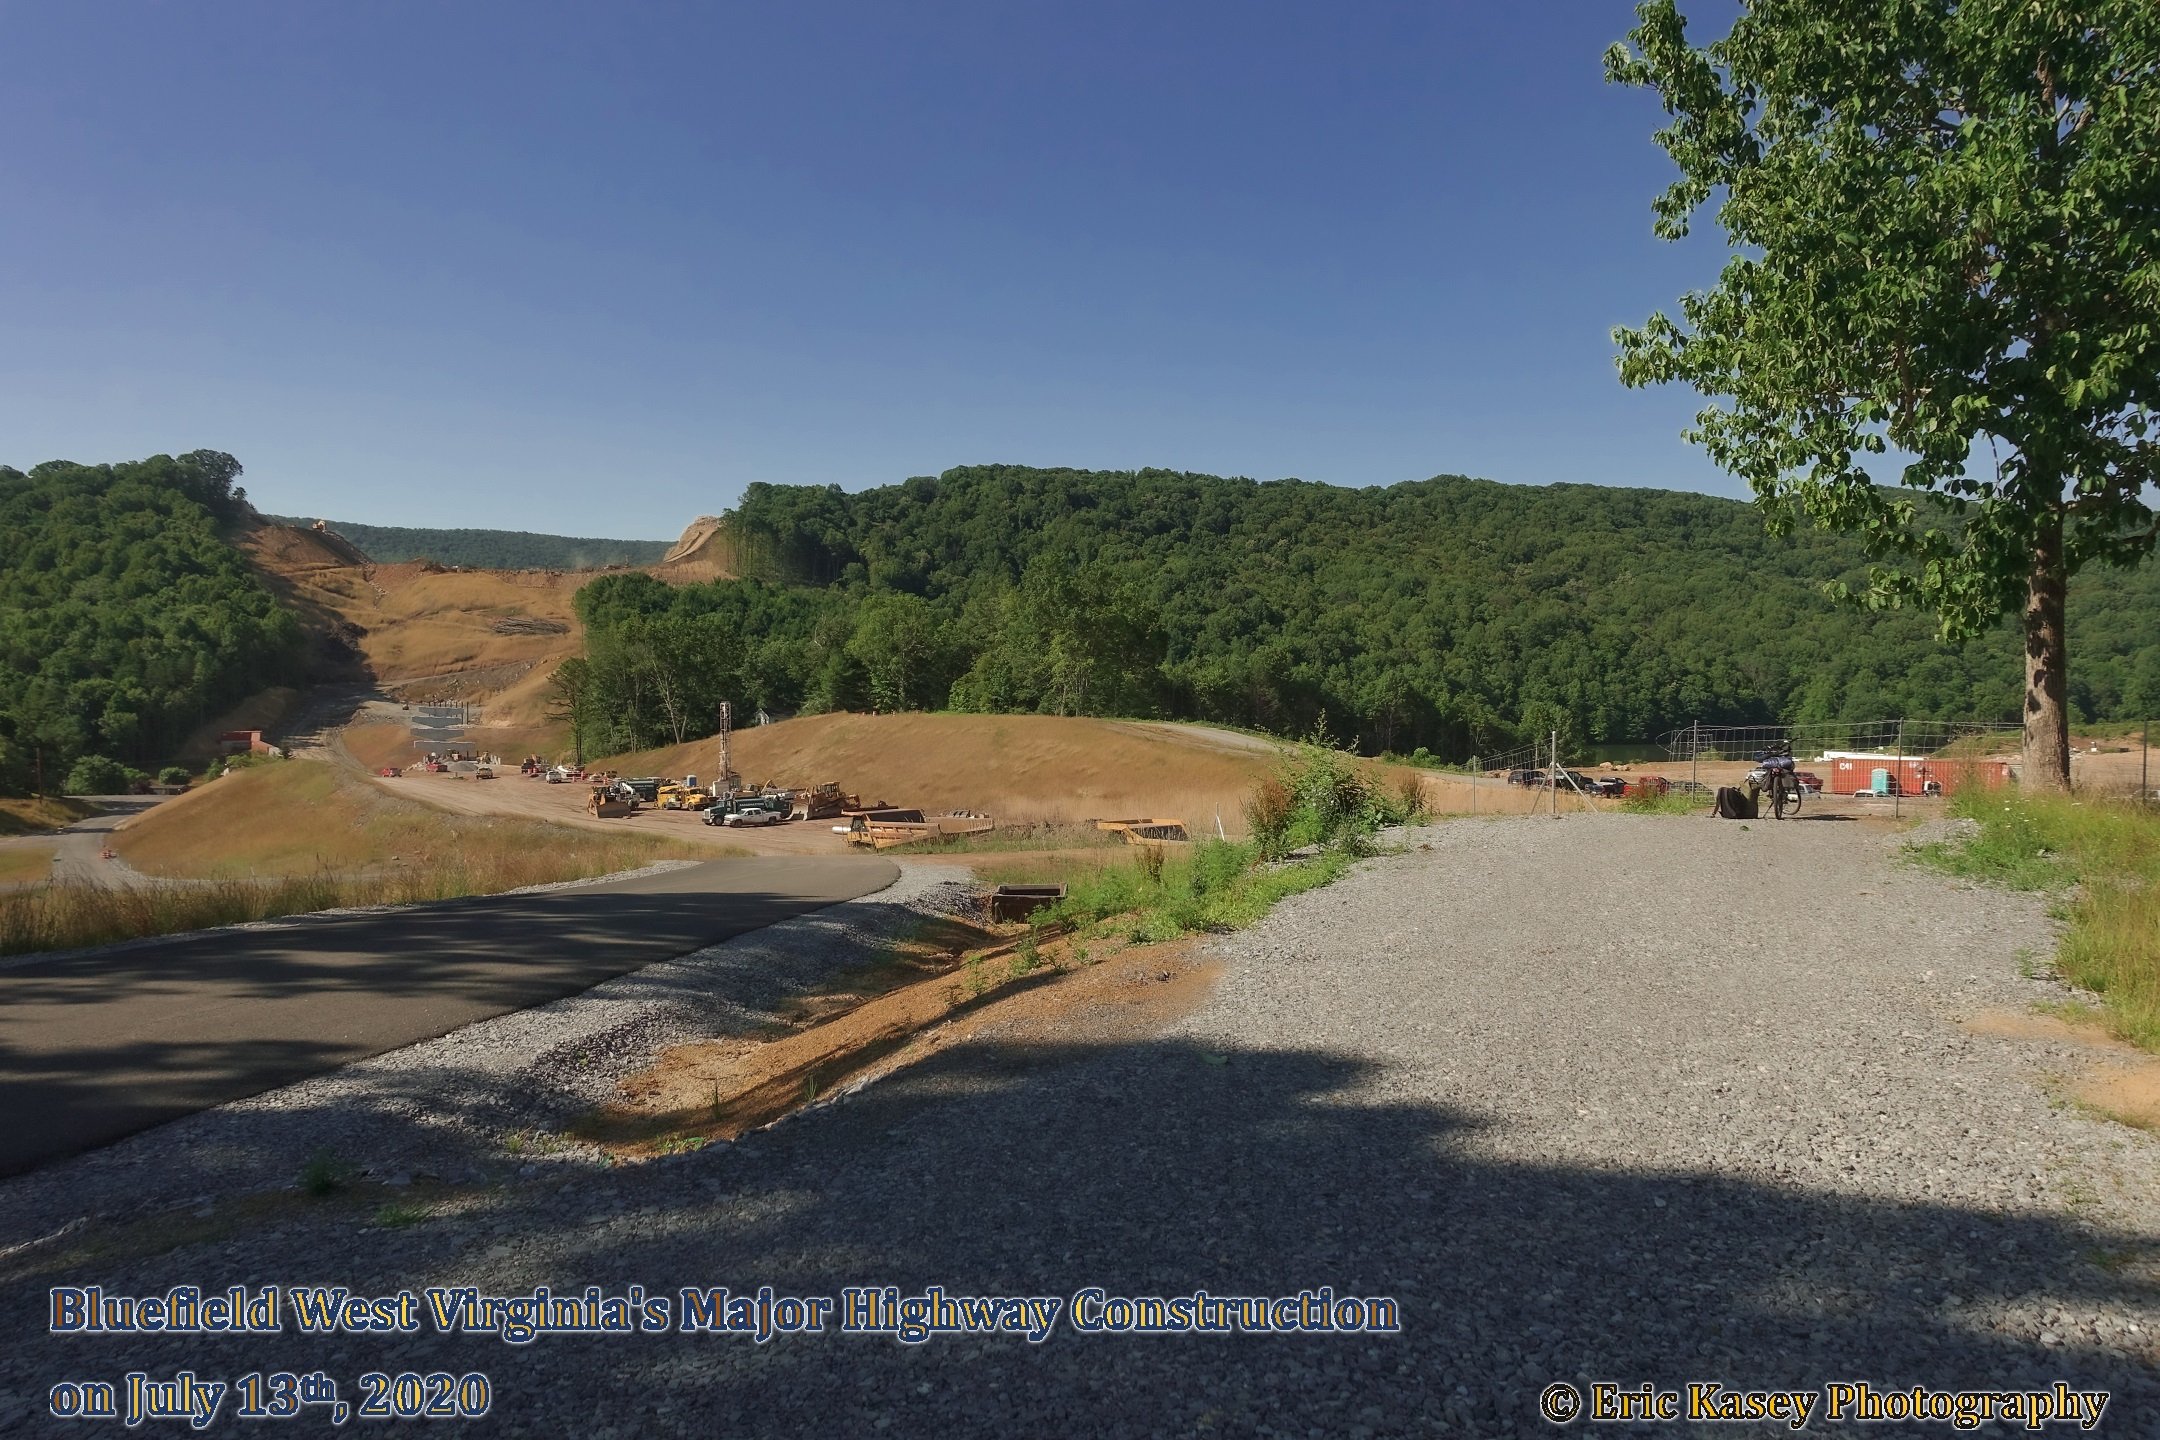 11 - Bluefield West Virginia's Major Highway Construction on July 13th, 2020.JPG